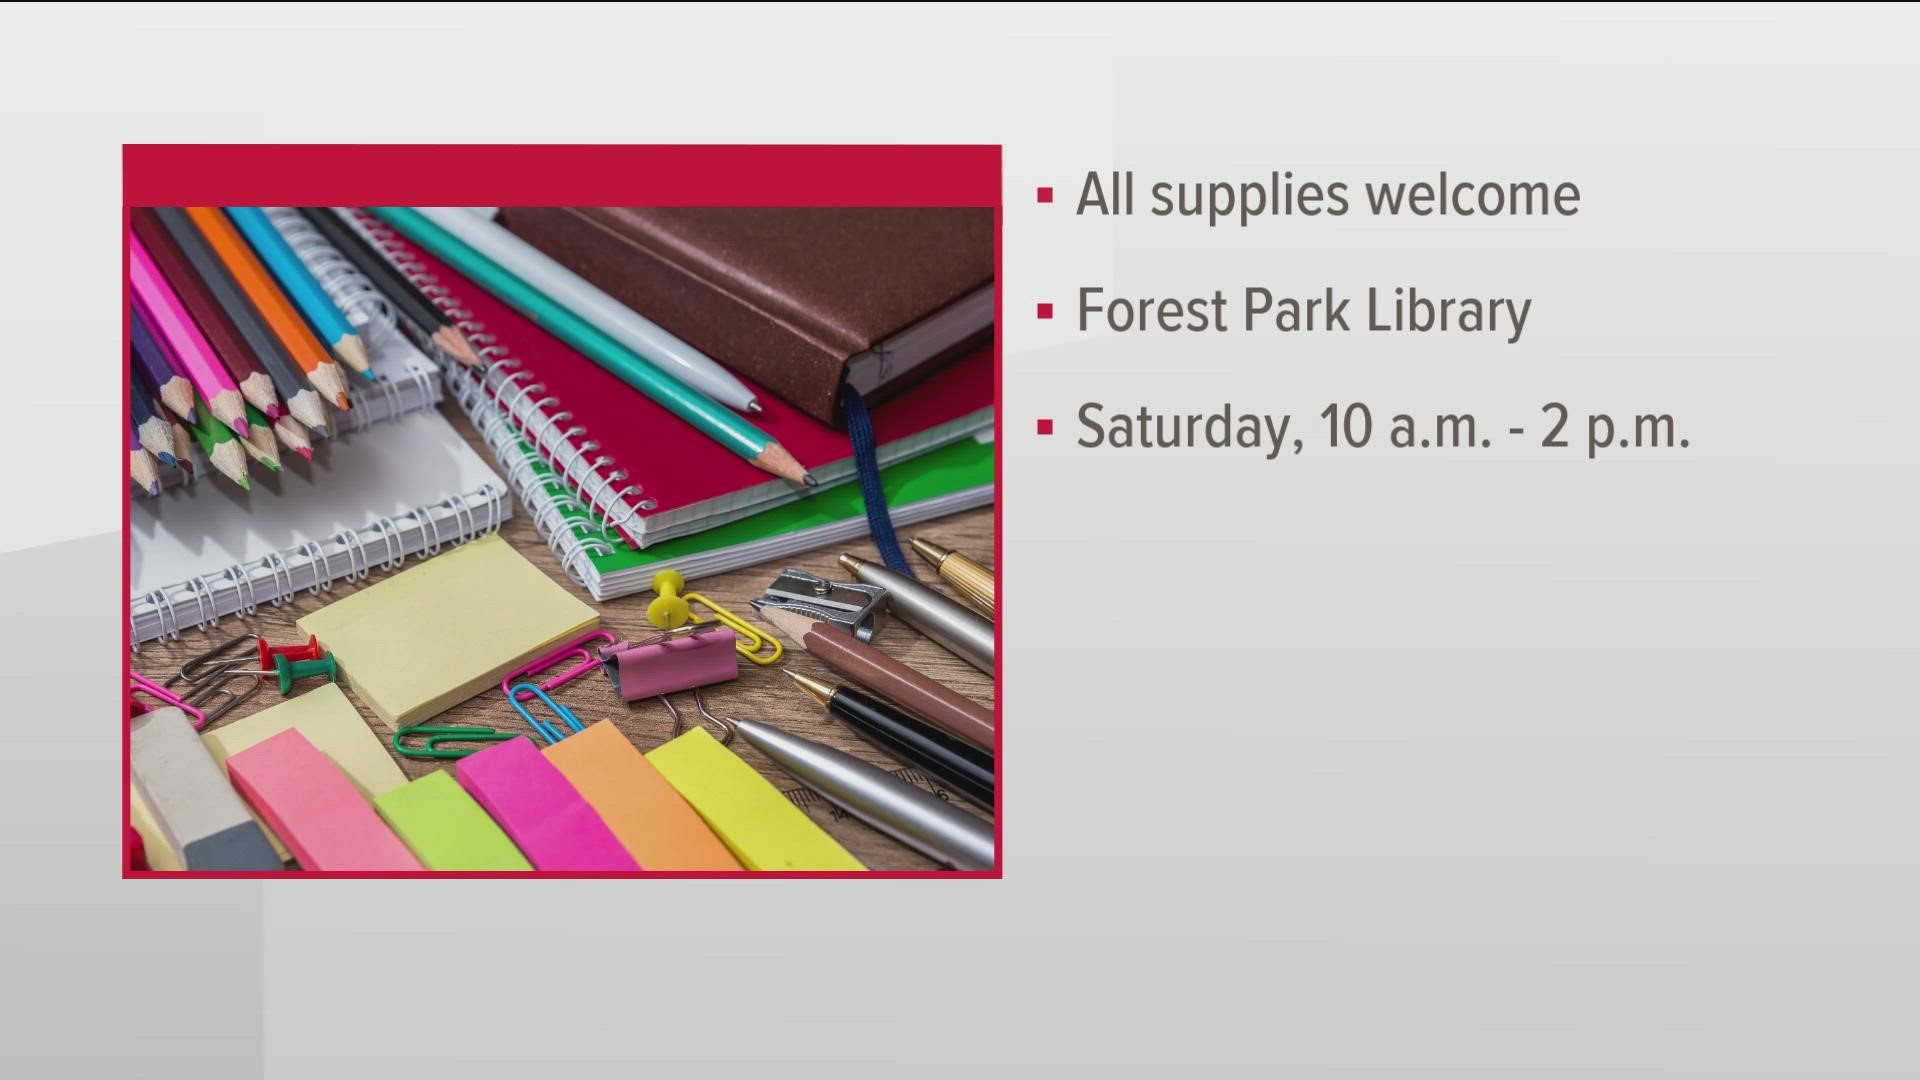 Bring school supplies for students to start off the new school year when they return in August.